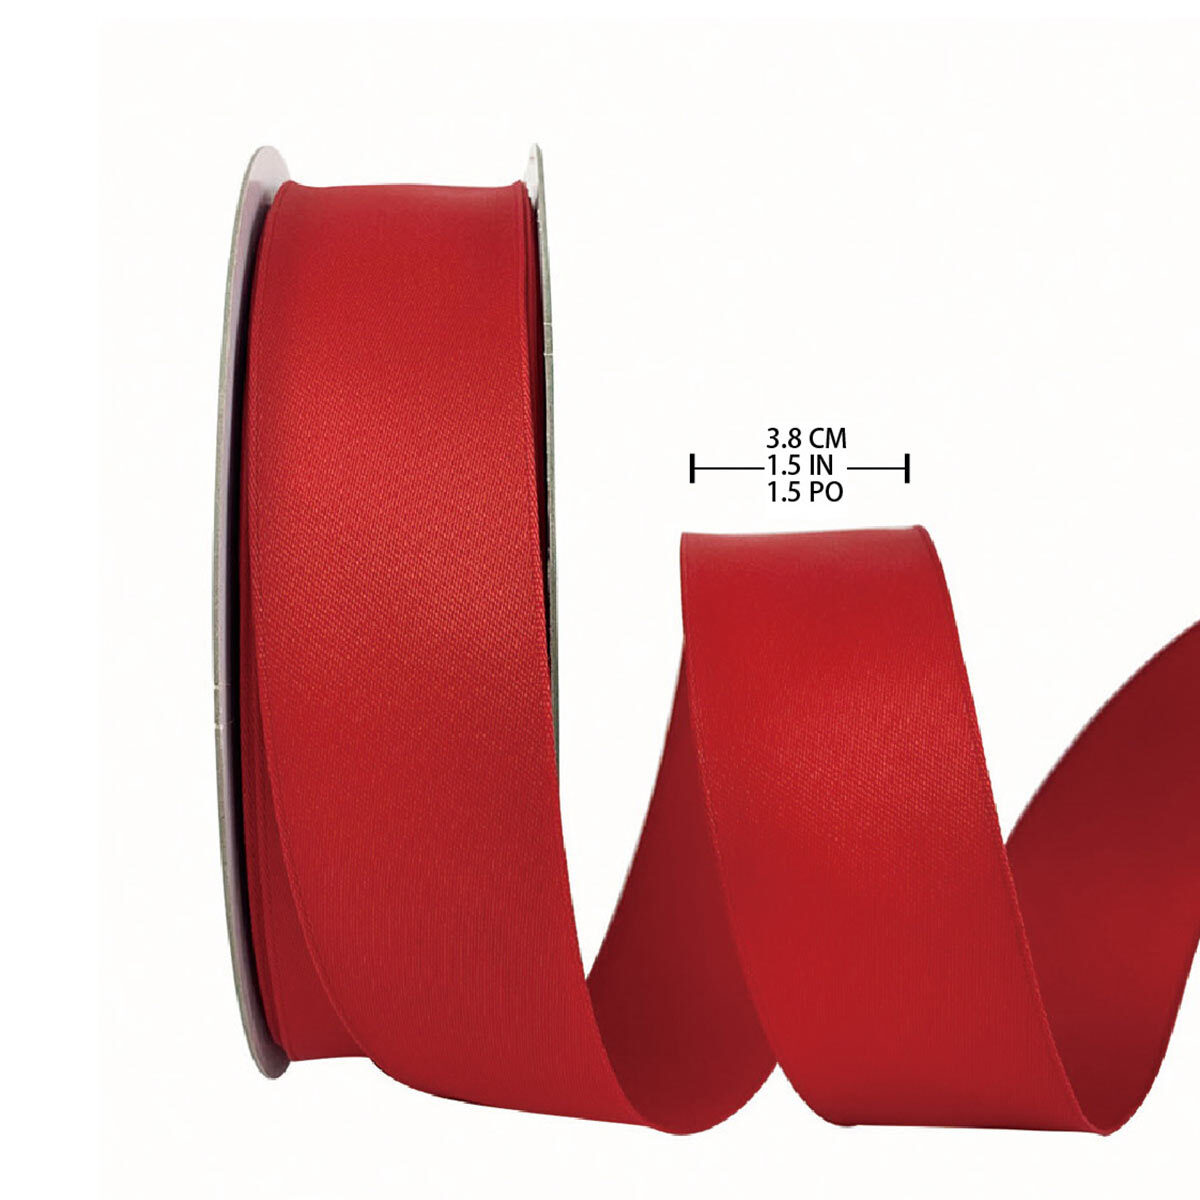 Buy KS Wire Edge Ribbon Country Lodge Dimensions3 Image at Costco.co.uk